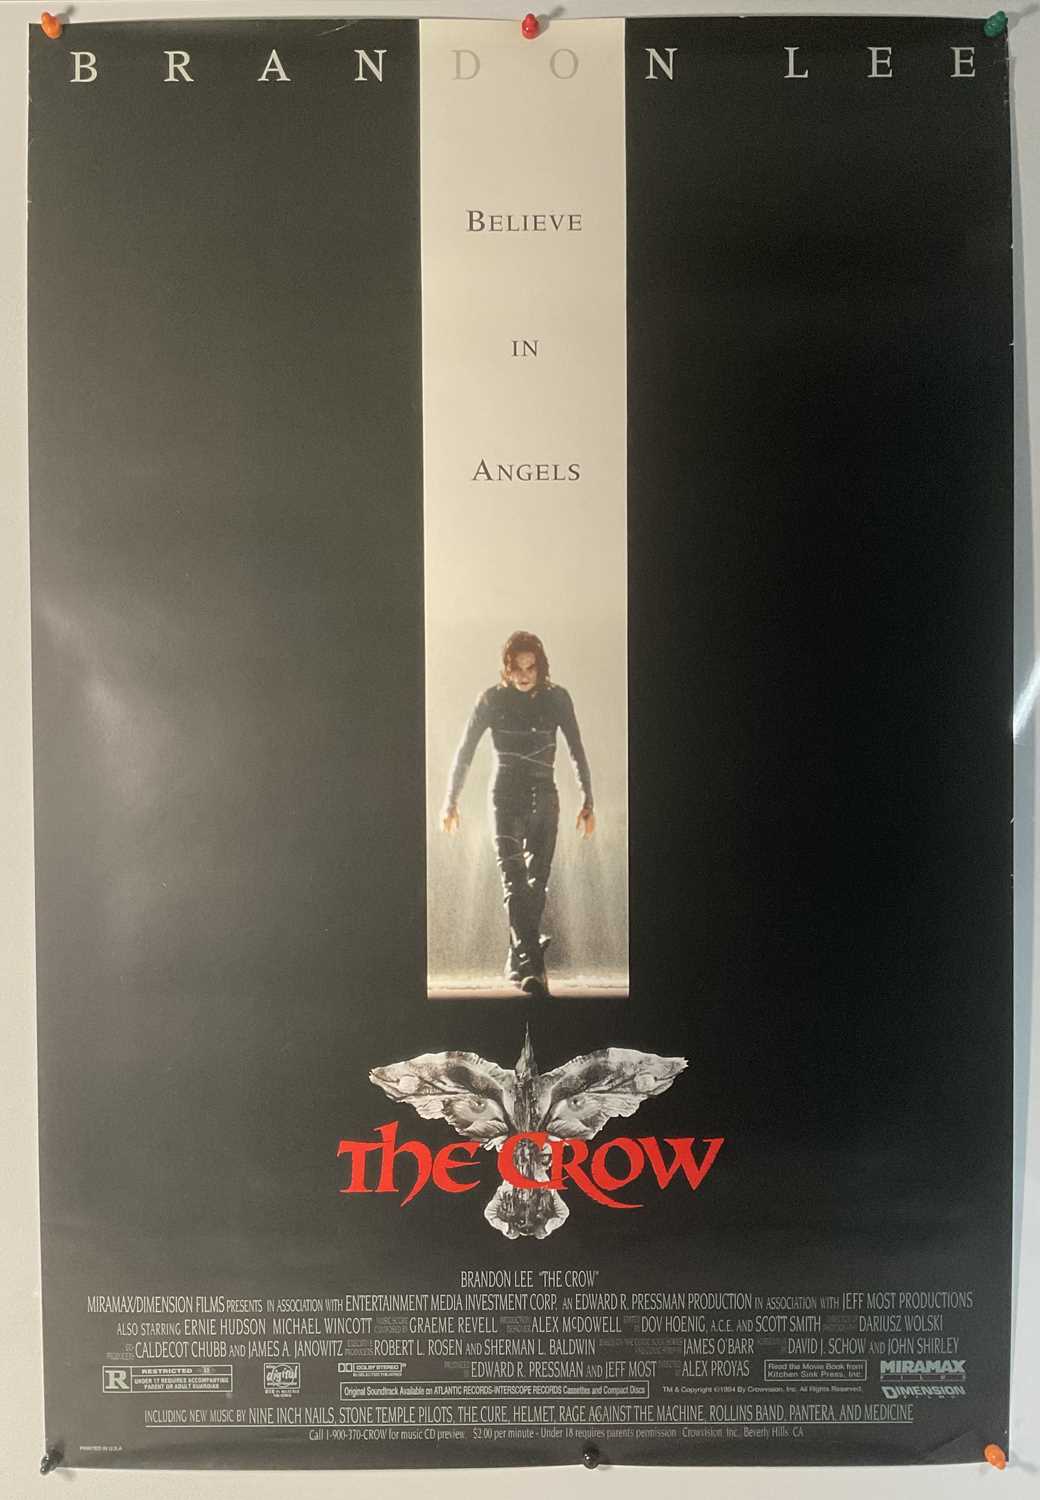 THE CROW (1994) US one-sheet, cult classic starring Brandon Lee in which Lee tragically died